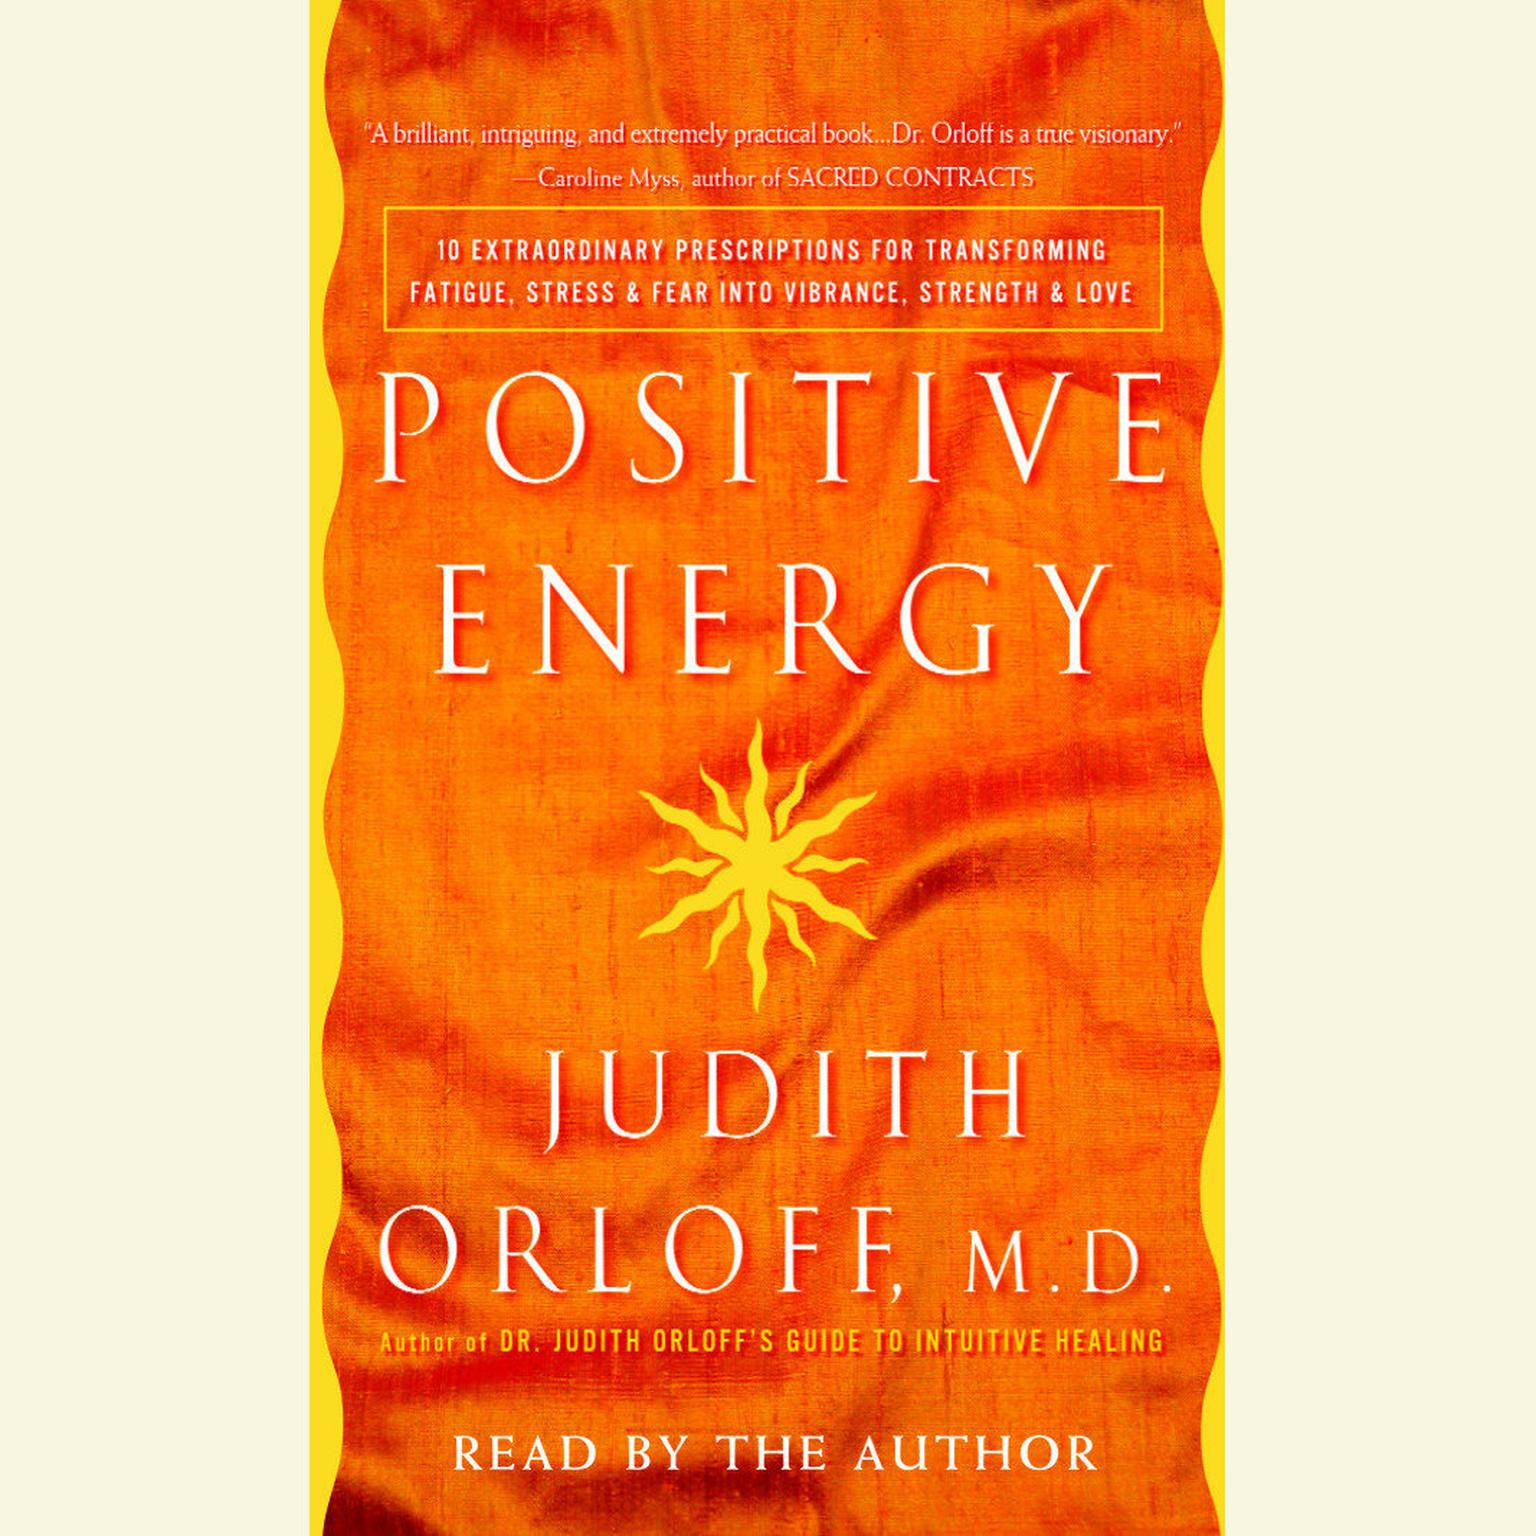 Positive Energy (Abridged): 10 Extraordinary Prescriptions for Transforming Fatigue, Stress, and Fear into Vibrance, Strength, and Love Audiobook, by Judith Orloff